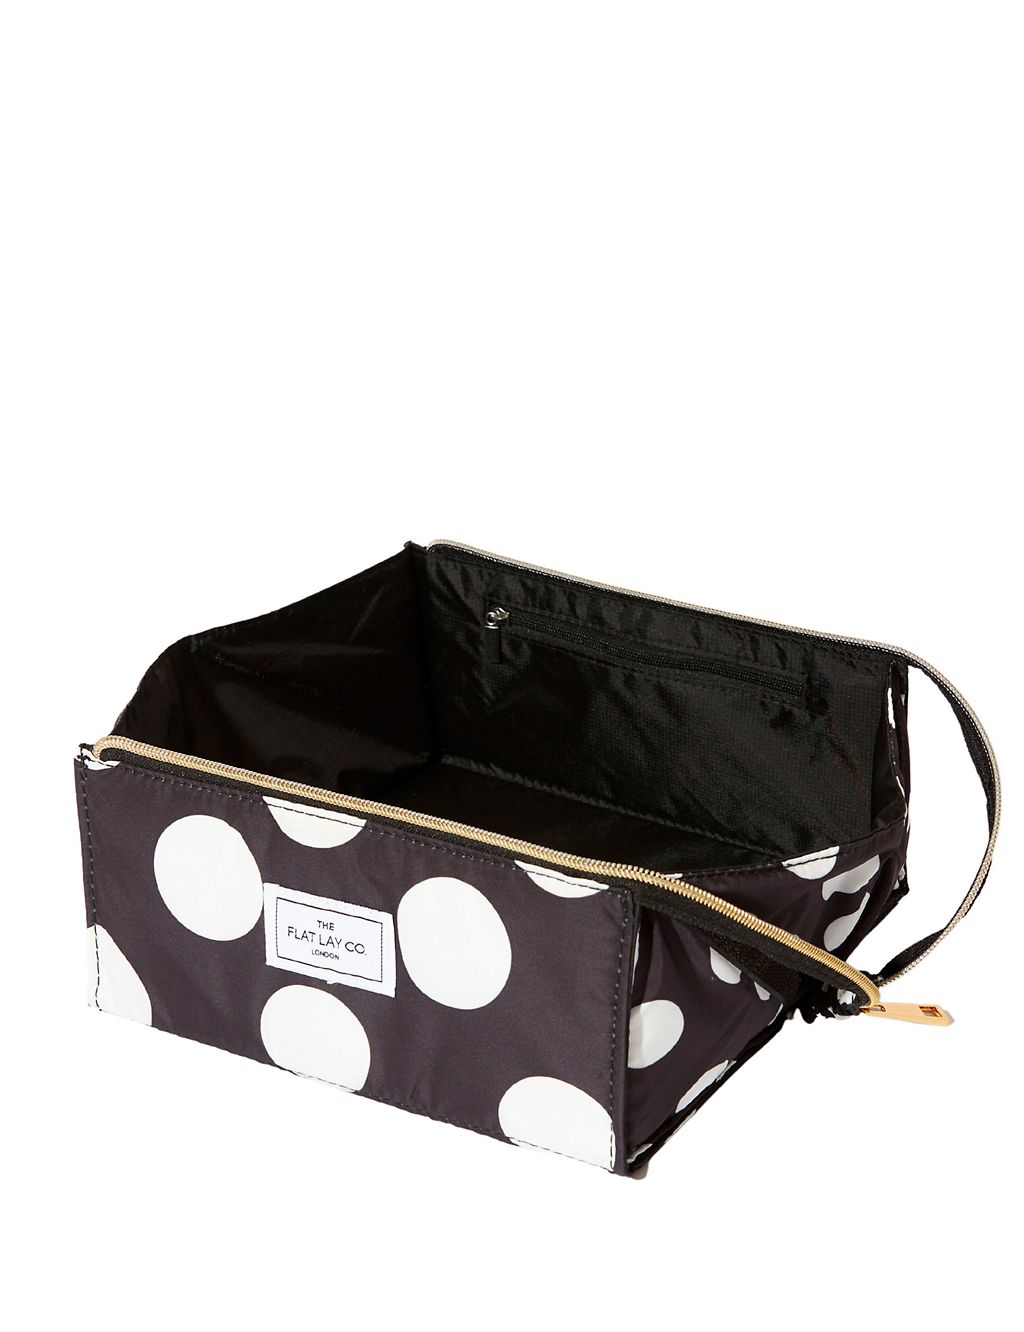 The Flat Lay Co. Makeup Box Bag in Double Spots 4 of 5